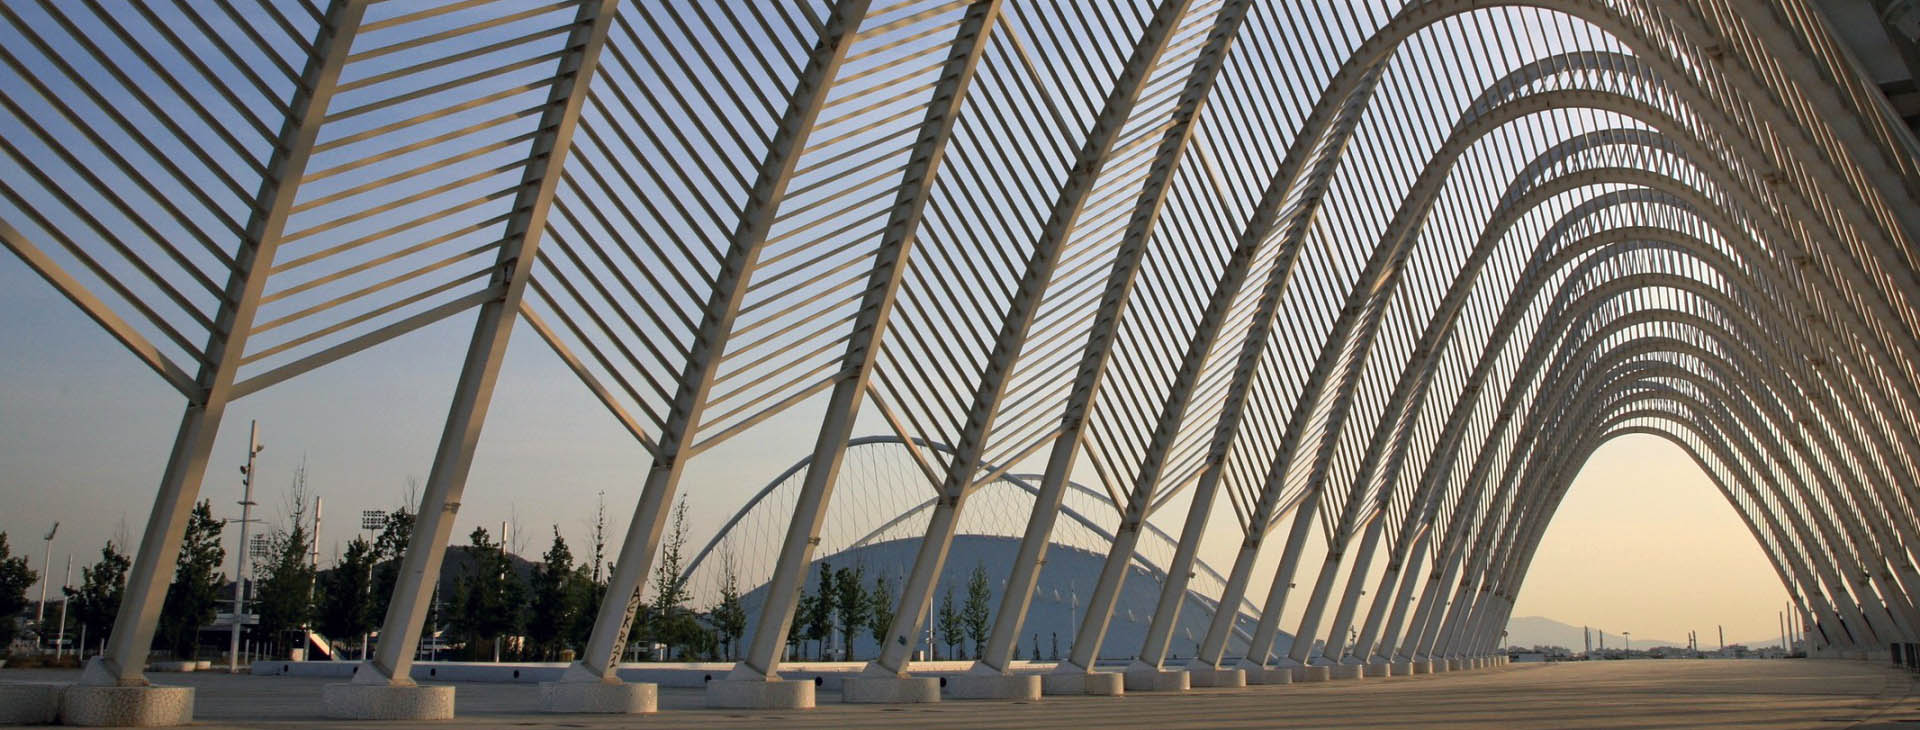 Arches at the Olympic Sports Complex, Athens